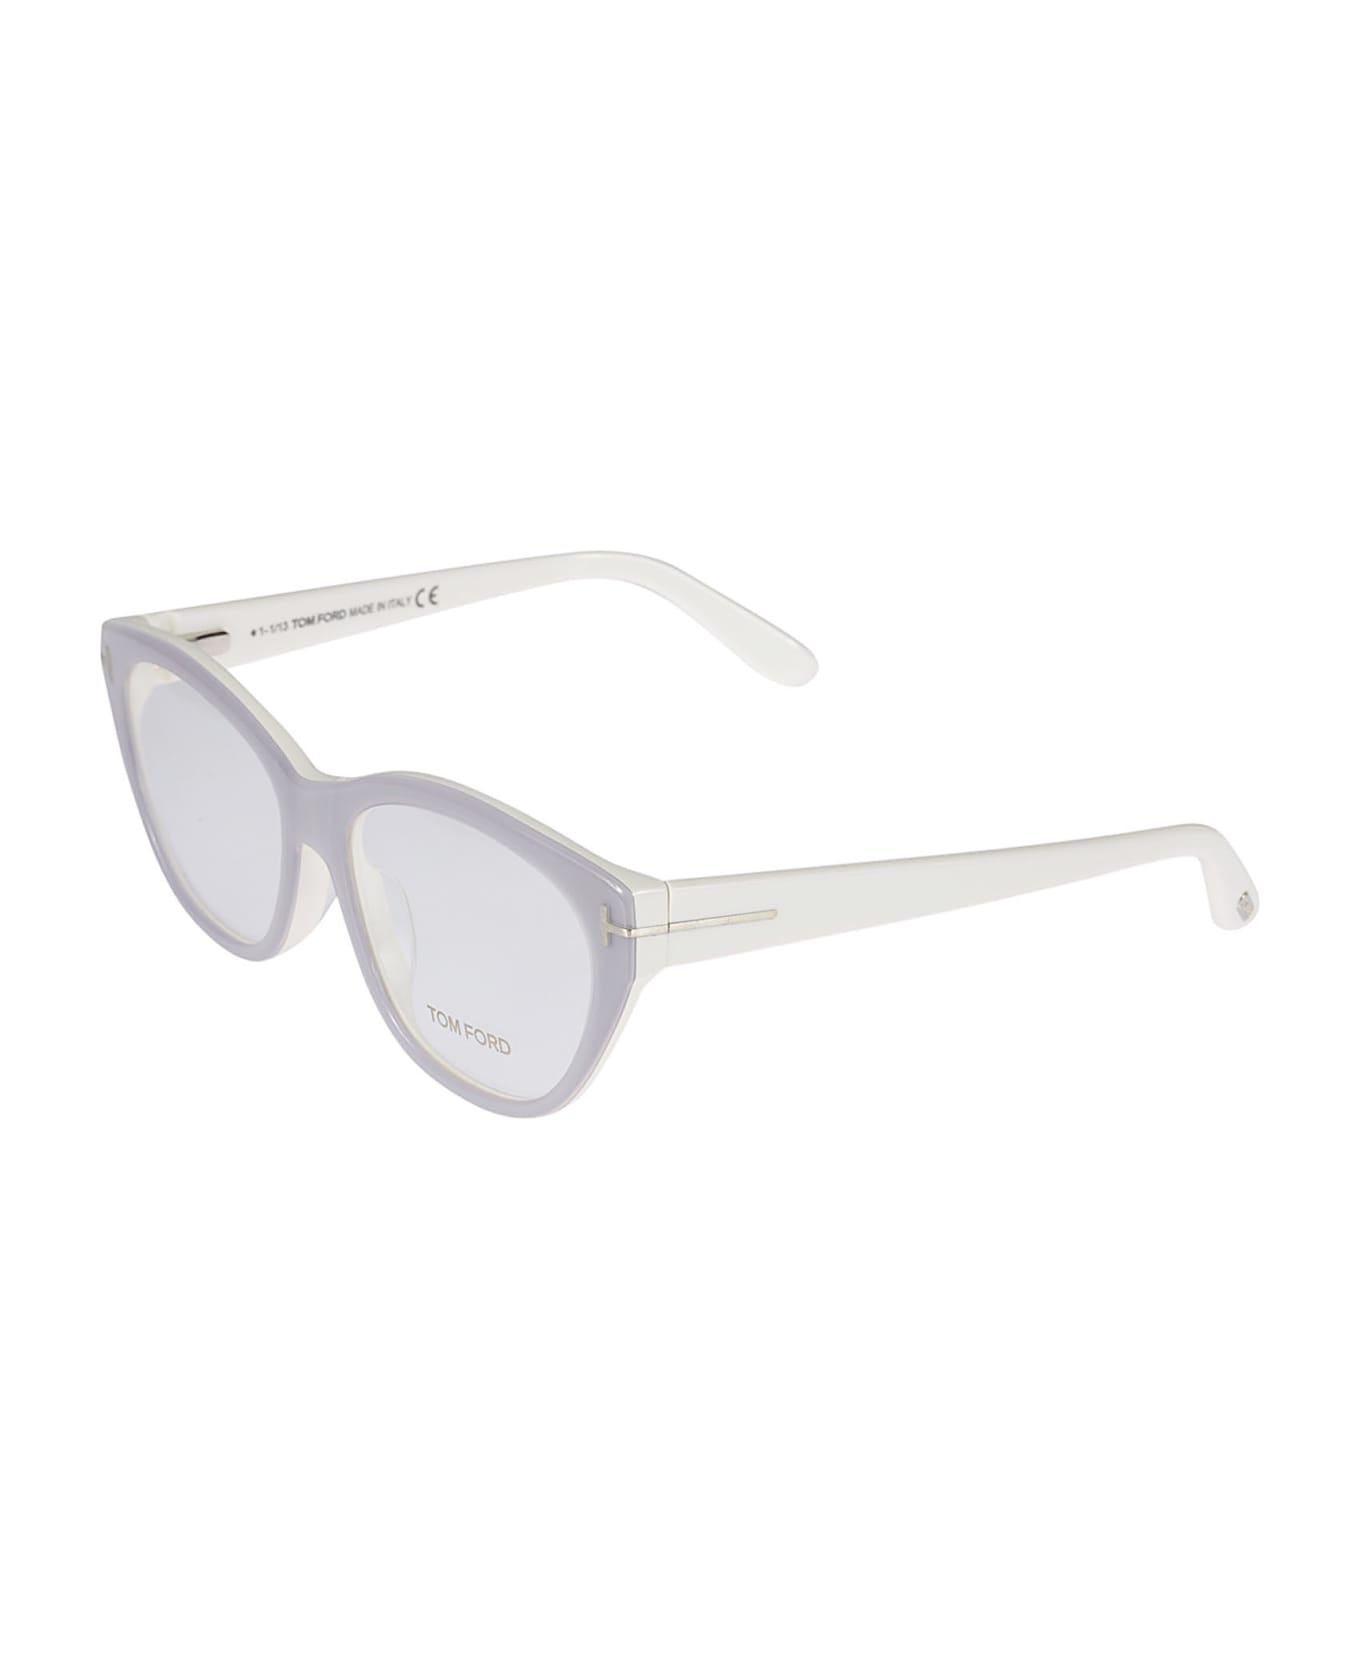 Tom Ford Eyewear T-plaque Clear Glasses - 020